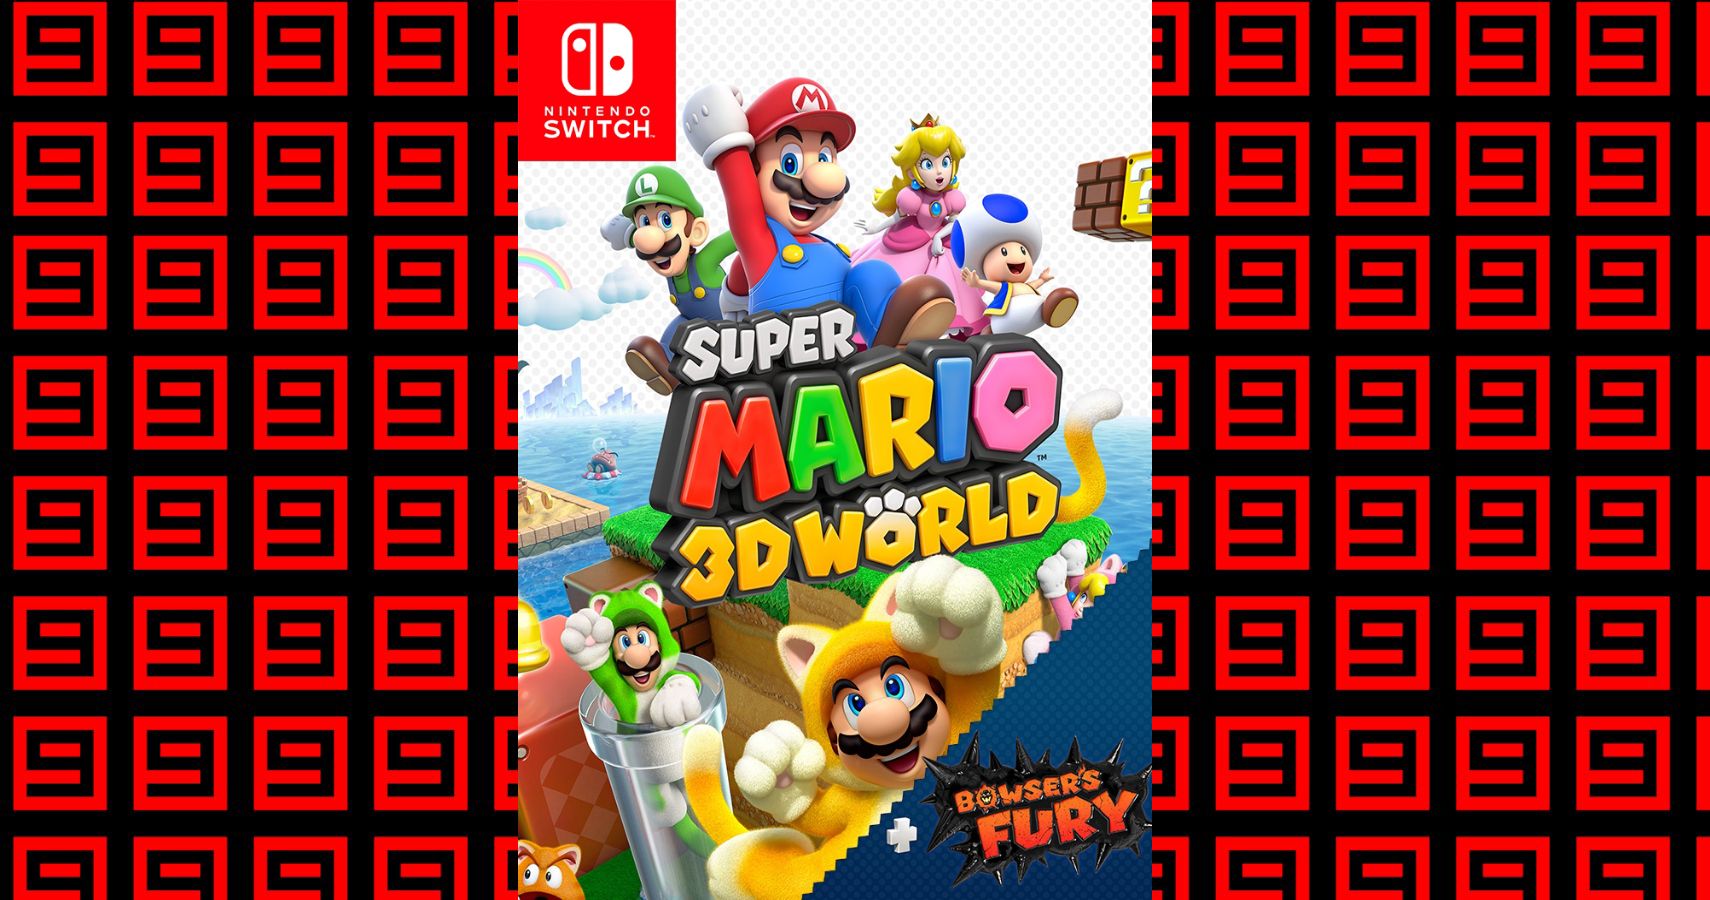 Super Mario 3D World + Bowser's Fury (Switch) desde 48,99 €